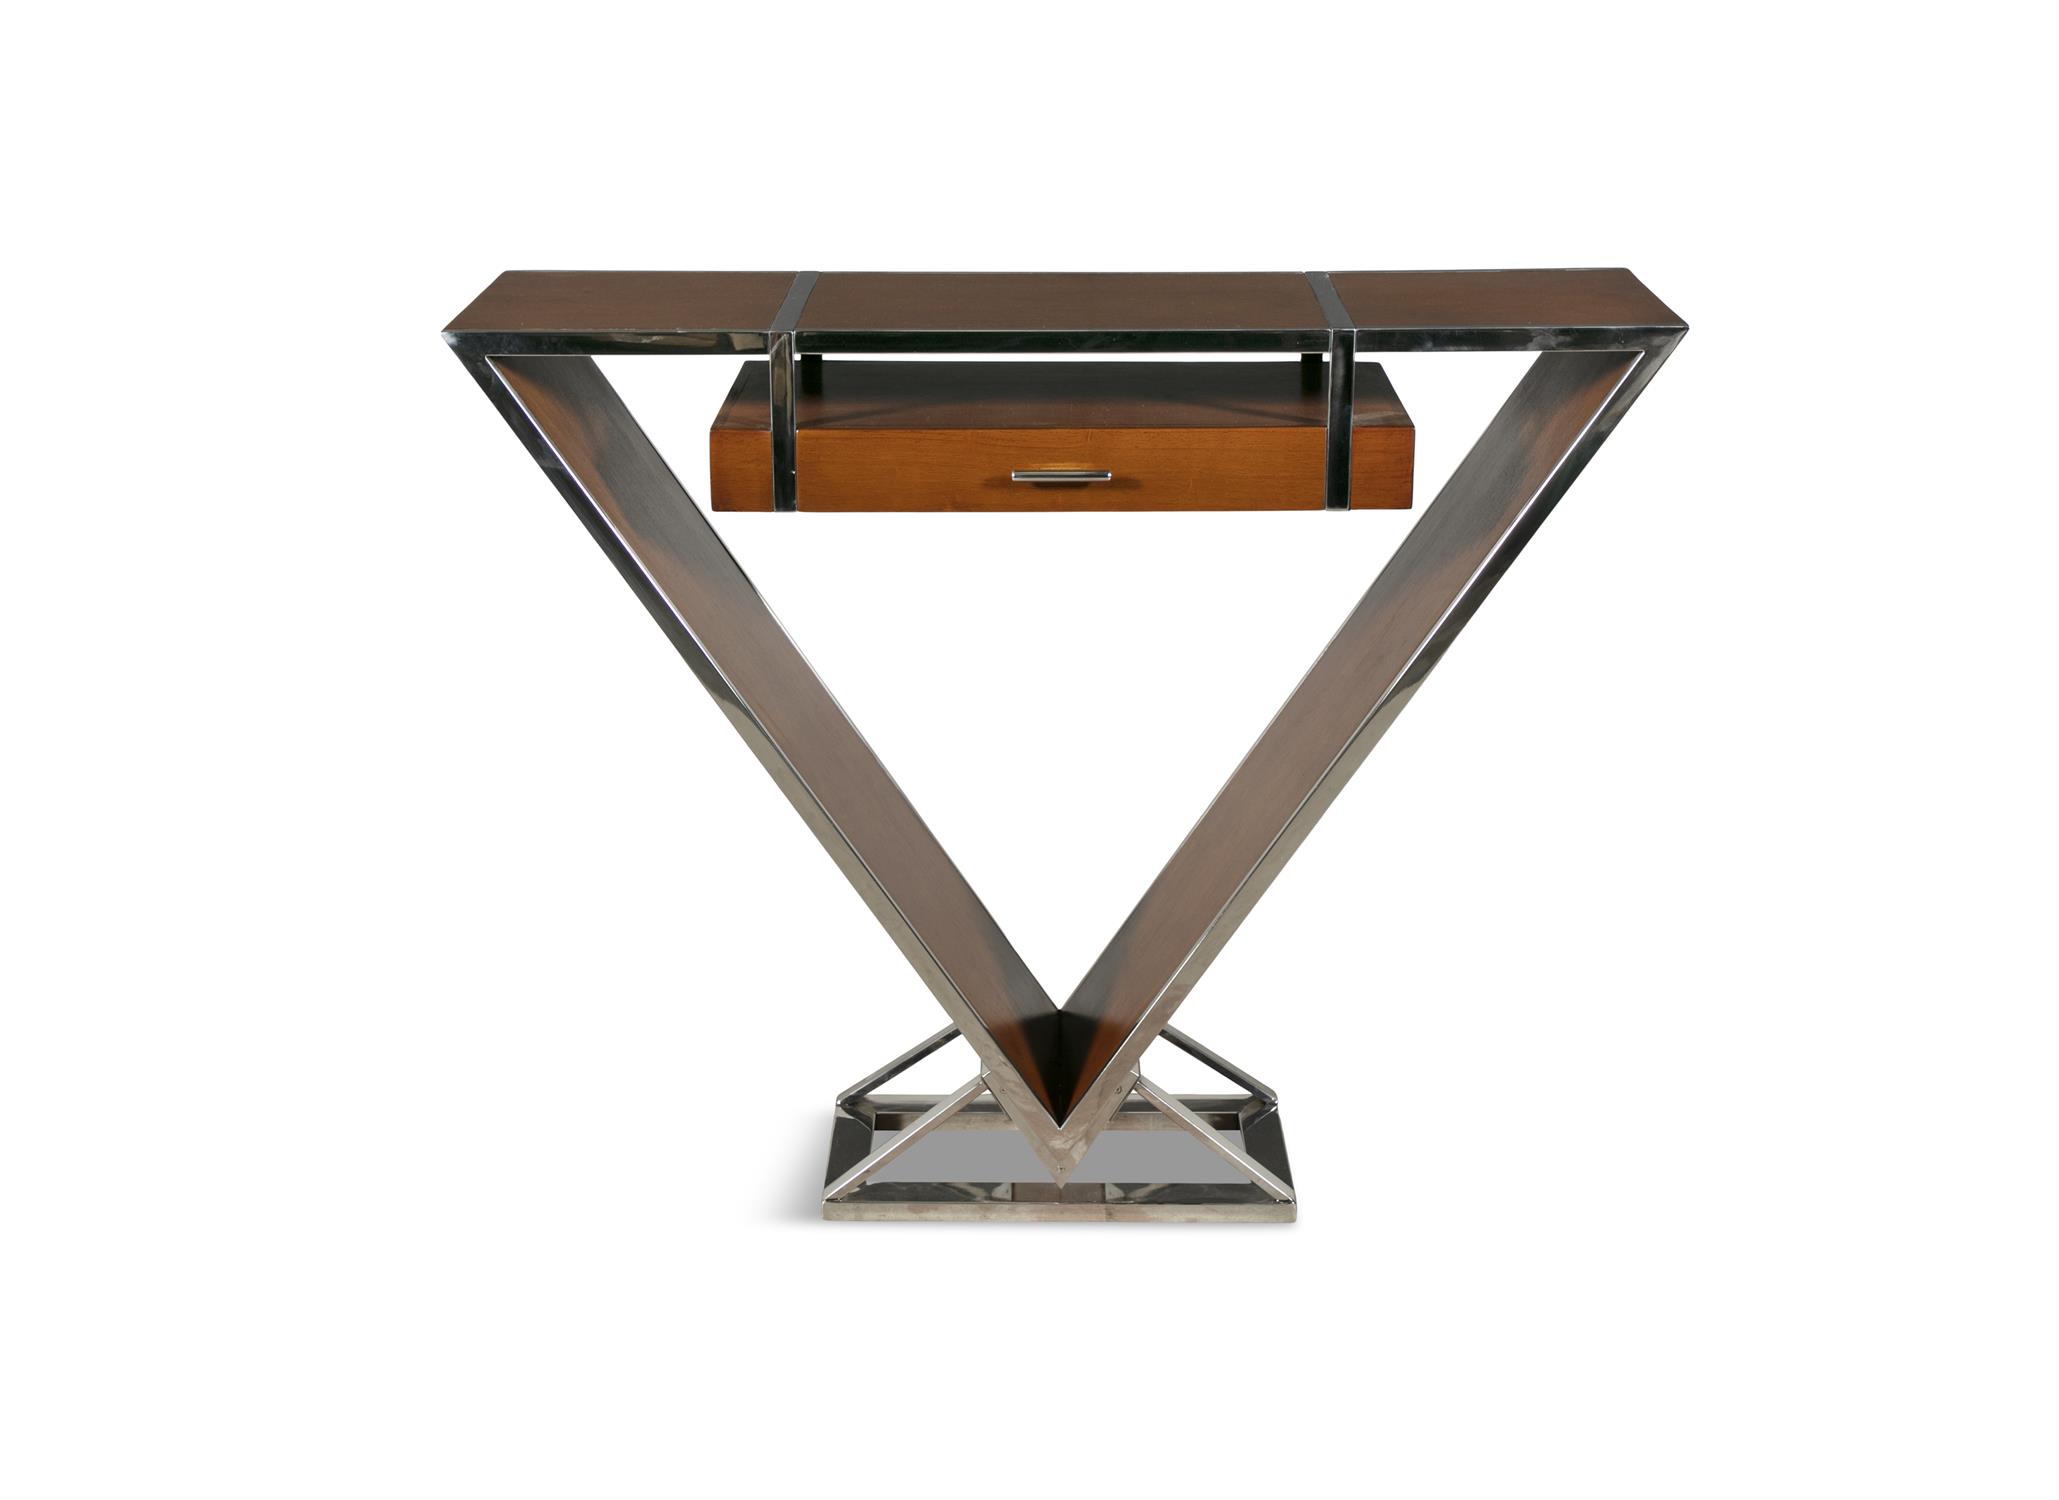 CONSOLE A triangular shaped console with a single drawer. Chrome and teak. France. - Image 2 of 7